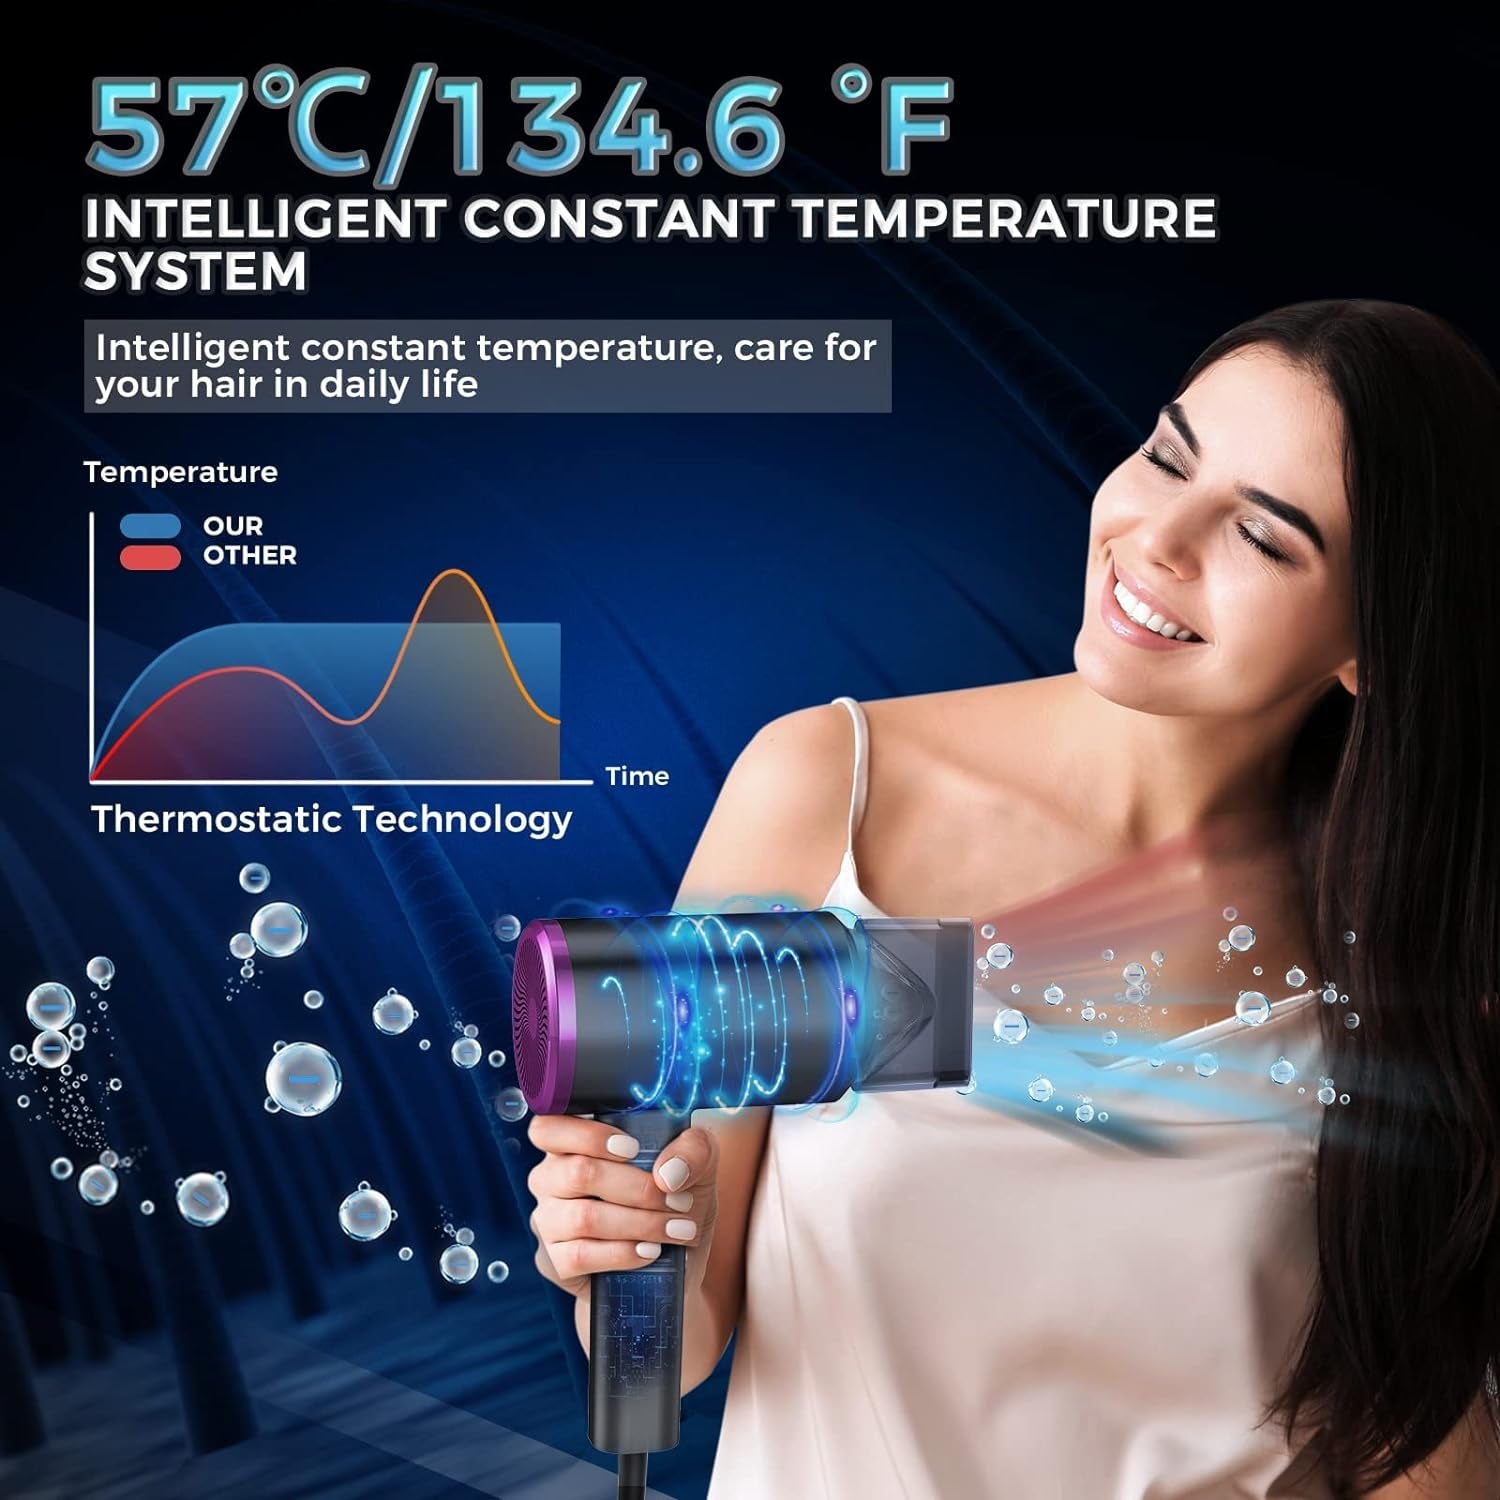 Hair Dryer with Diffuser, 1800W Ionic Travel Hiar Dryer, Foldable Handle, Constant Temperature Hair Care without Hair Damage, Purple - HealthFulBeautyLife